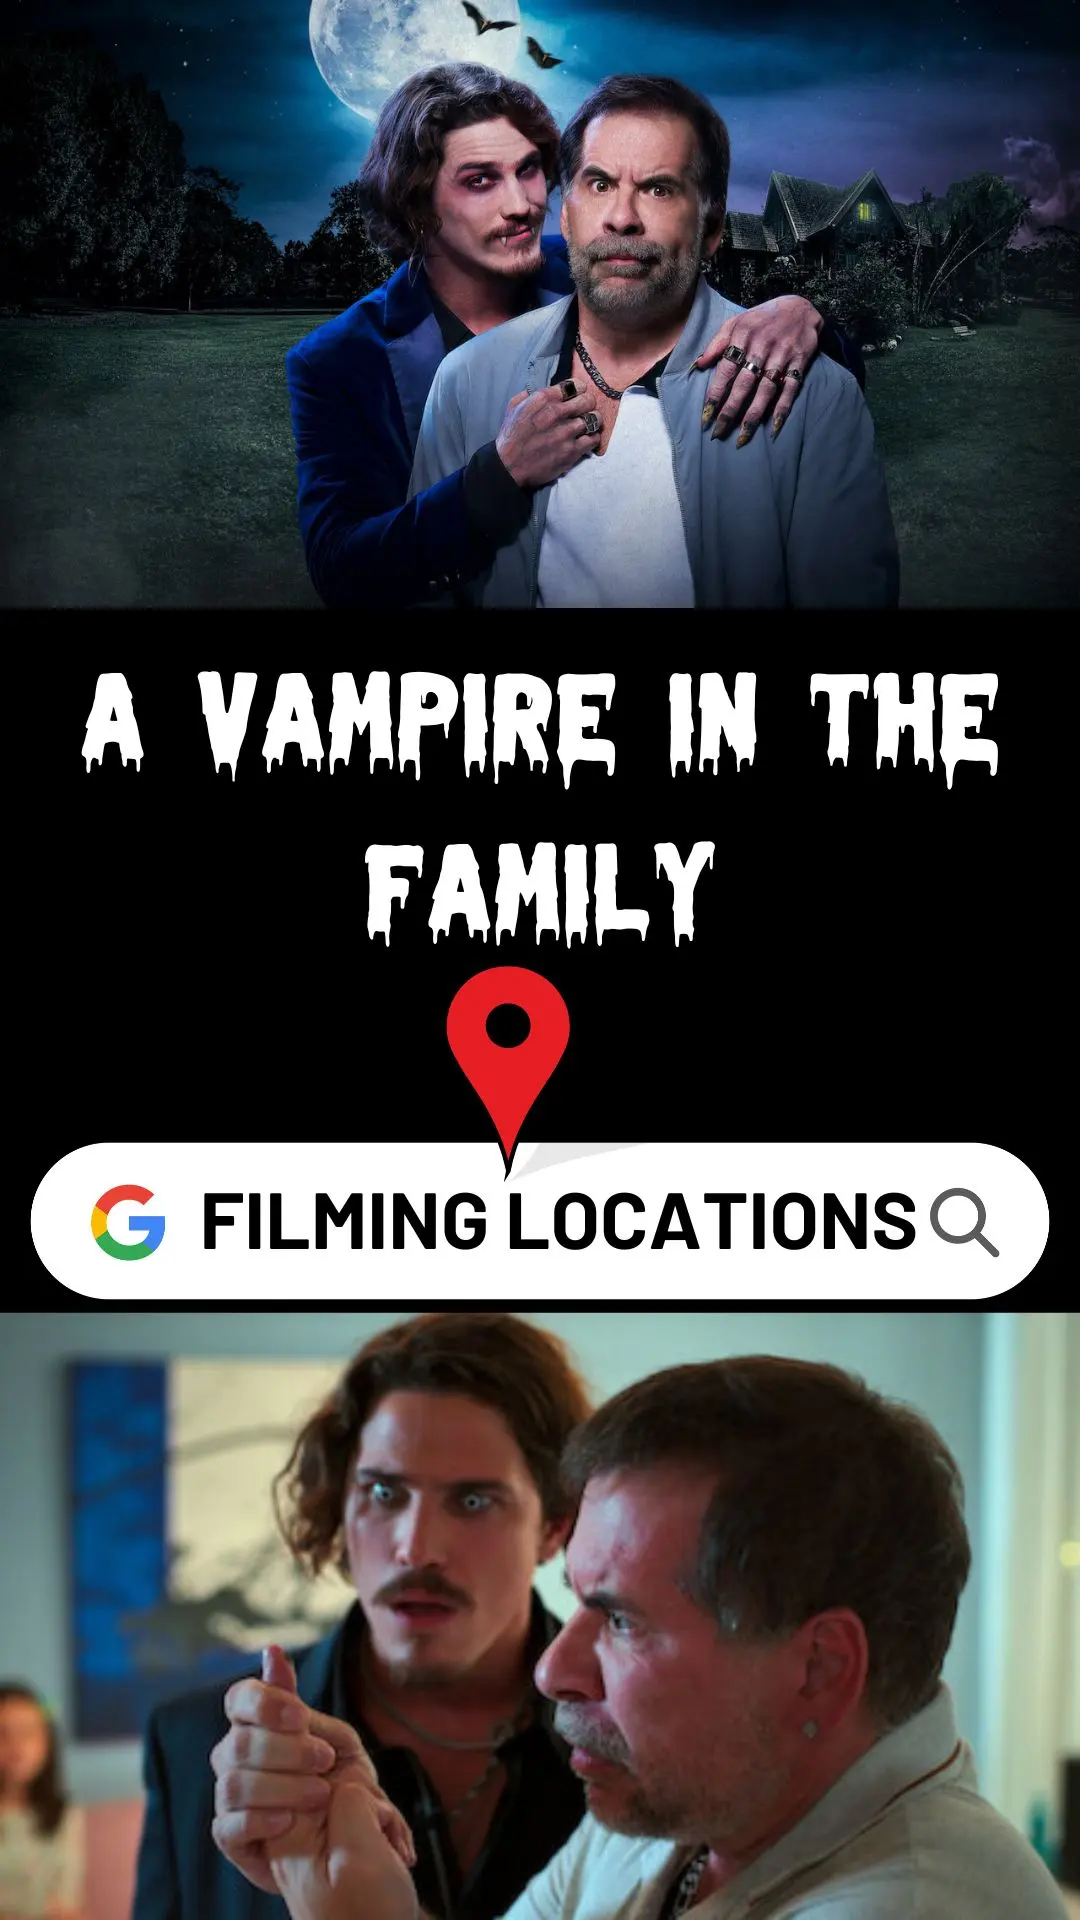 A Vampire in the Family Filming Locations